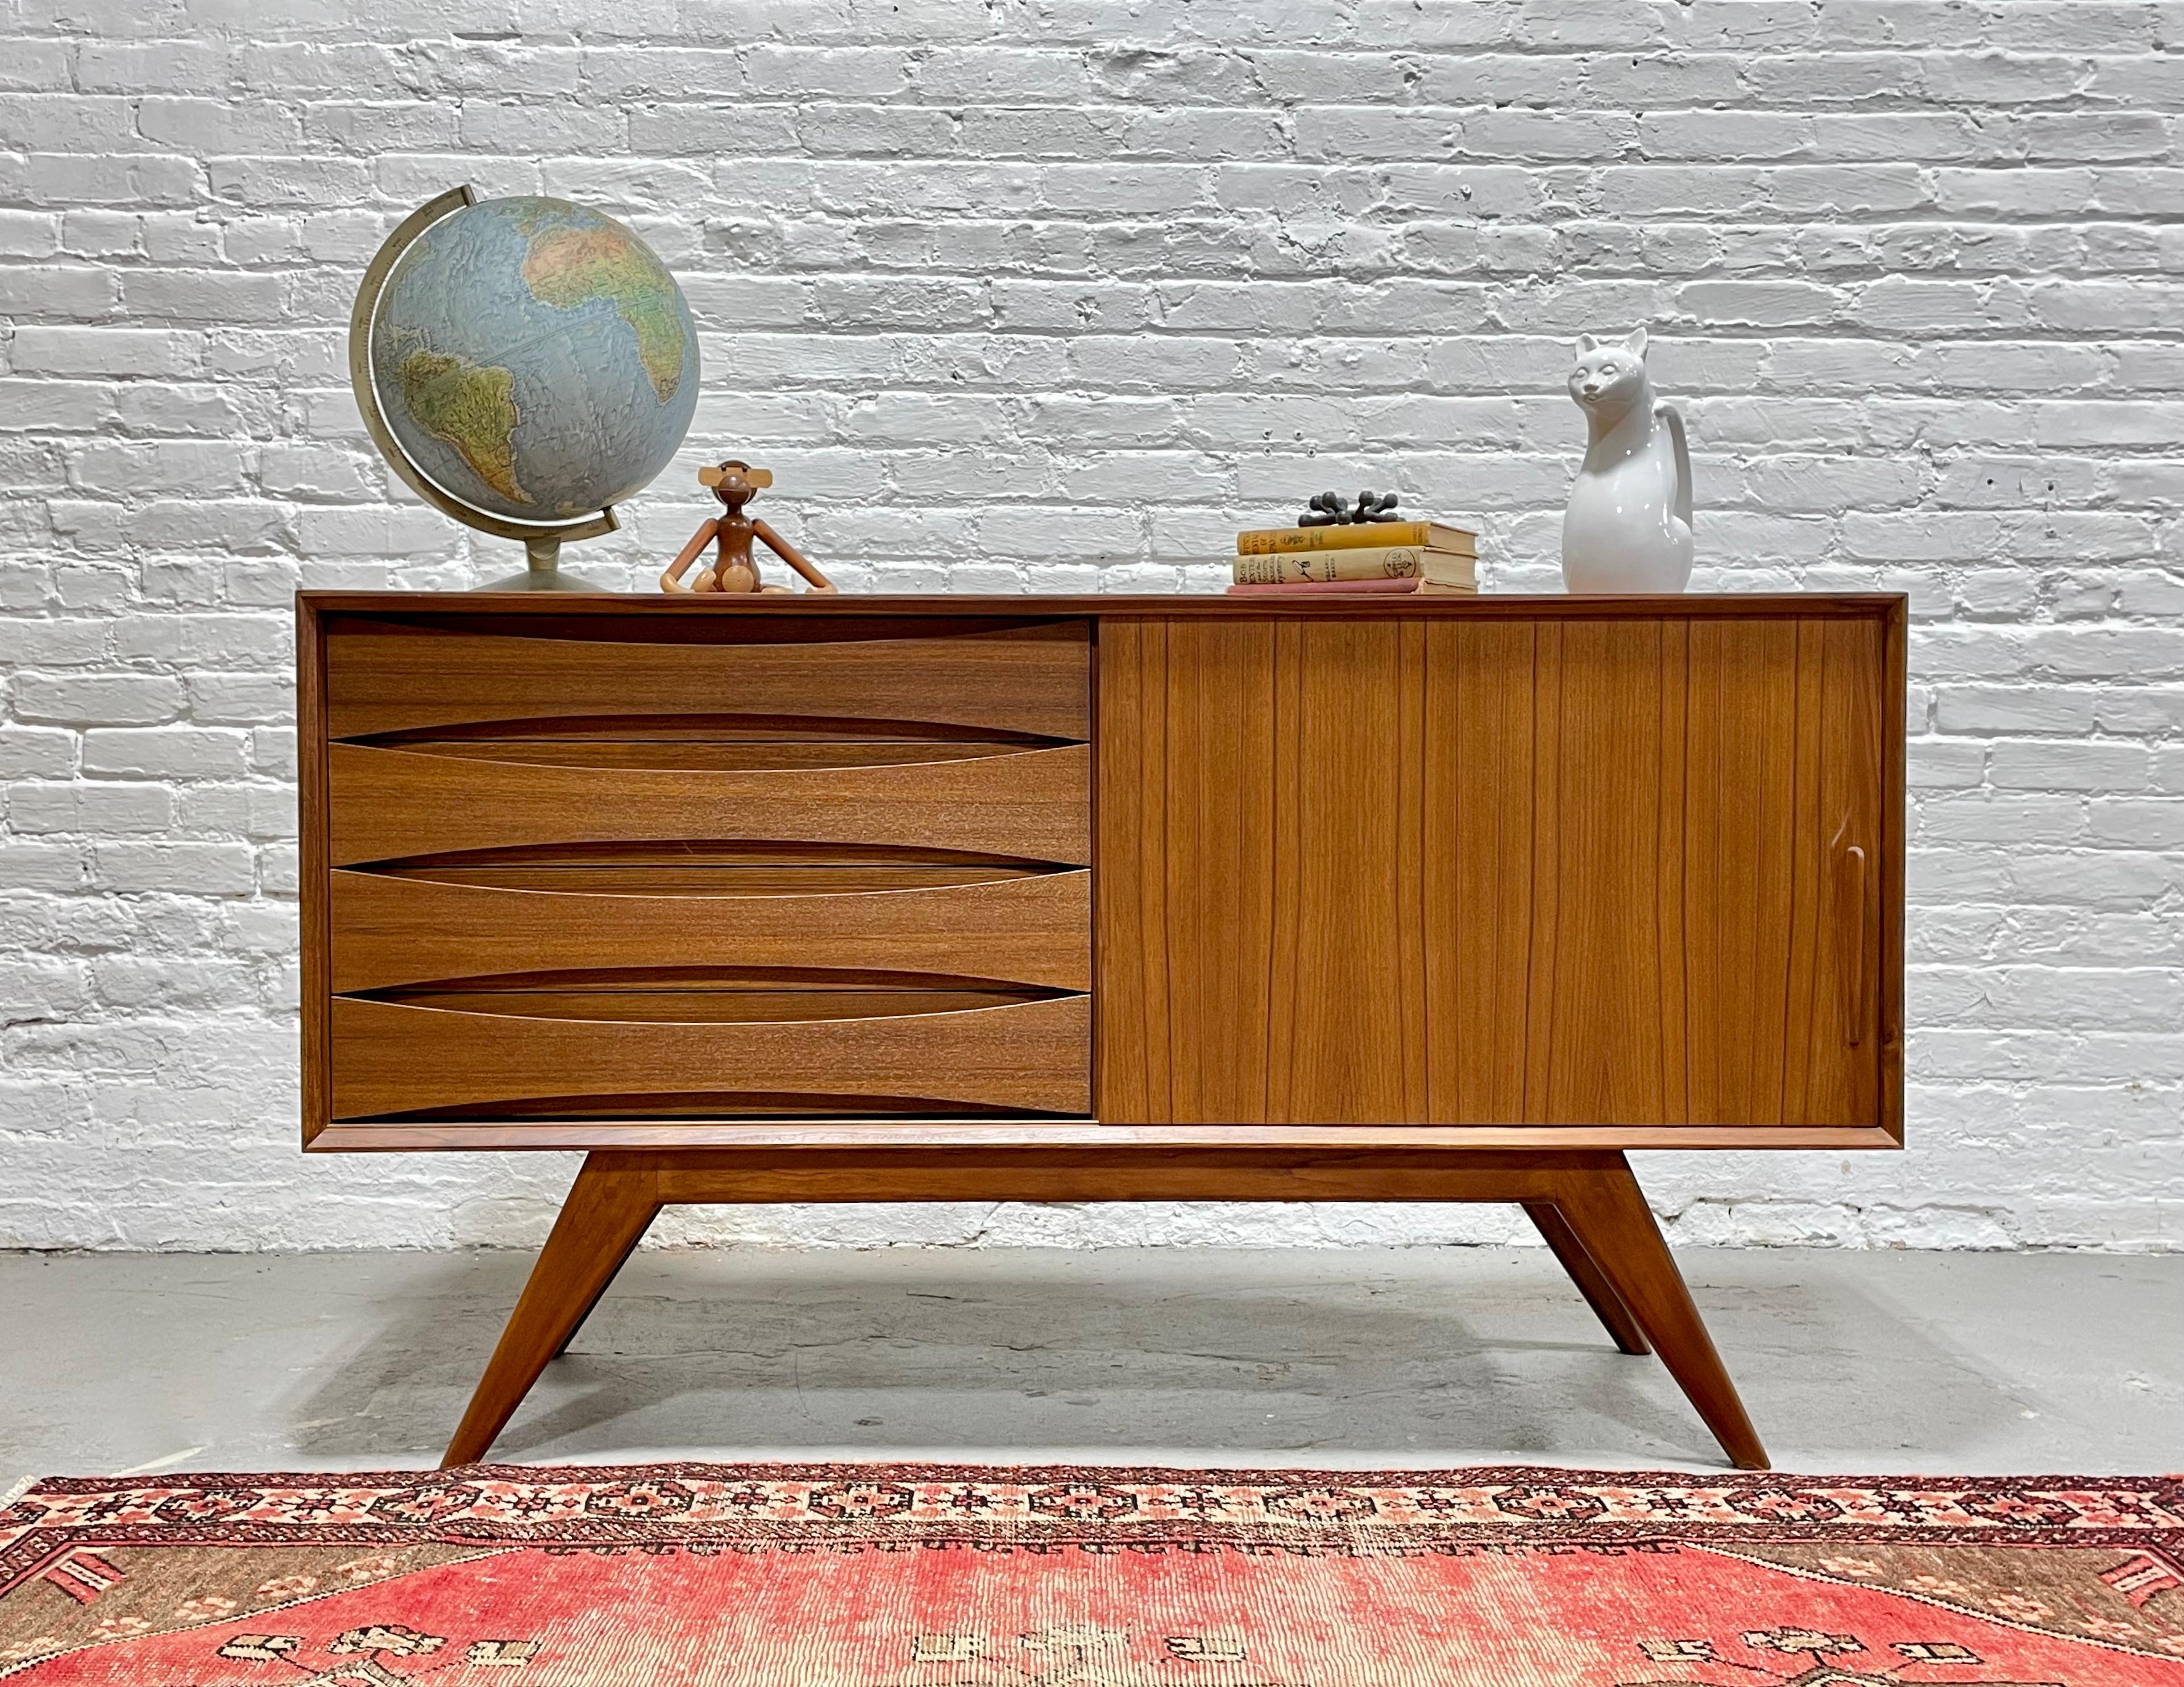 Perfect smaller sized Mid Century styled credenza / media stand with superb splayed leg design. Thoughtful layout for a media stand - shelving for components along one side and streamlined drawers for remotes, dvds and other accessories. The funky